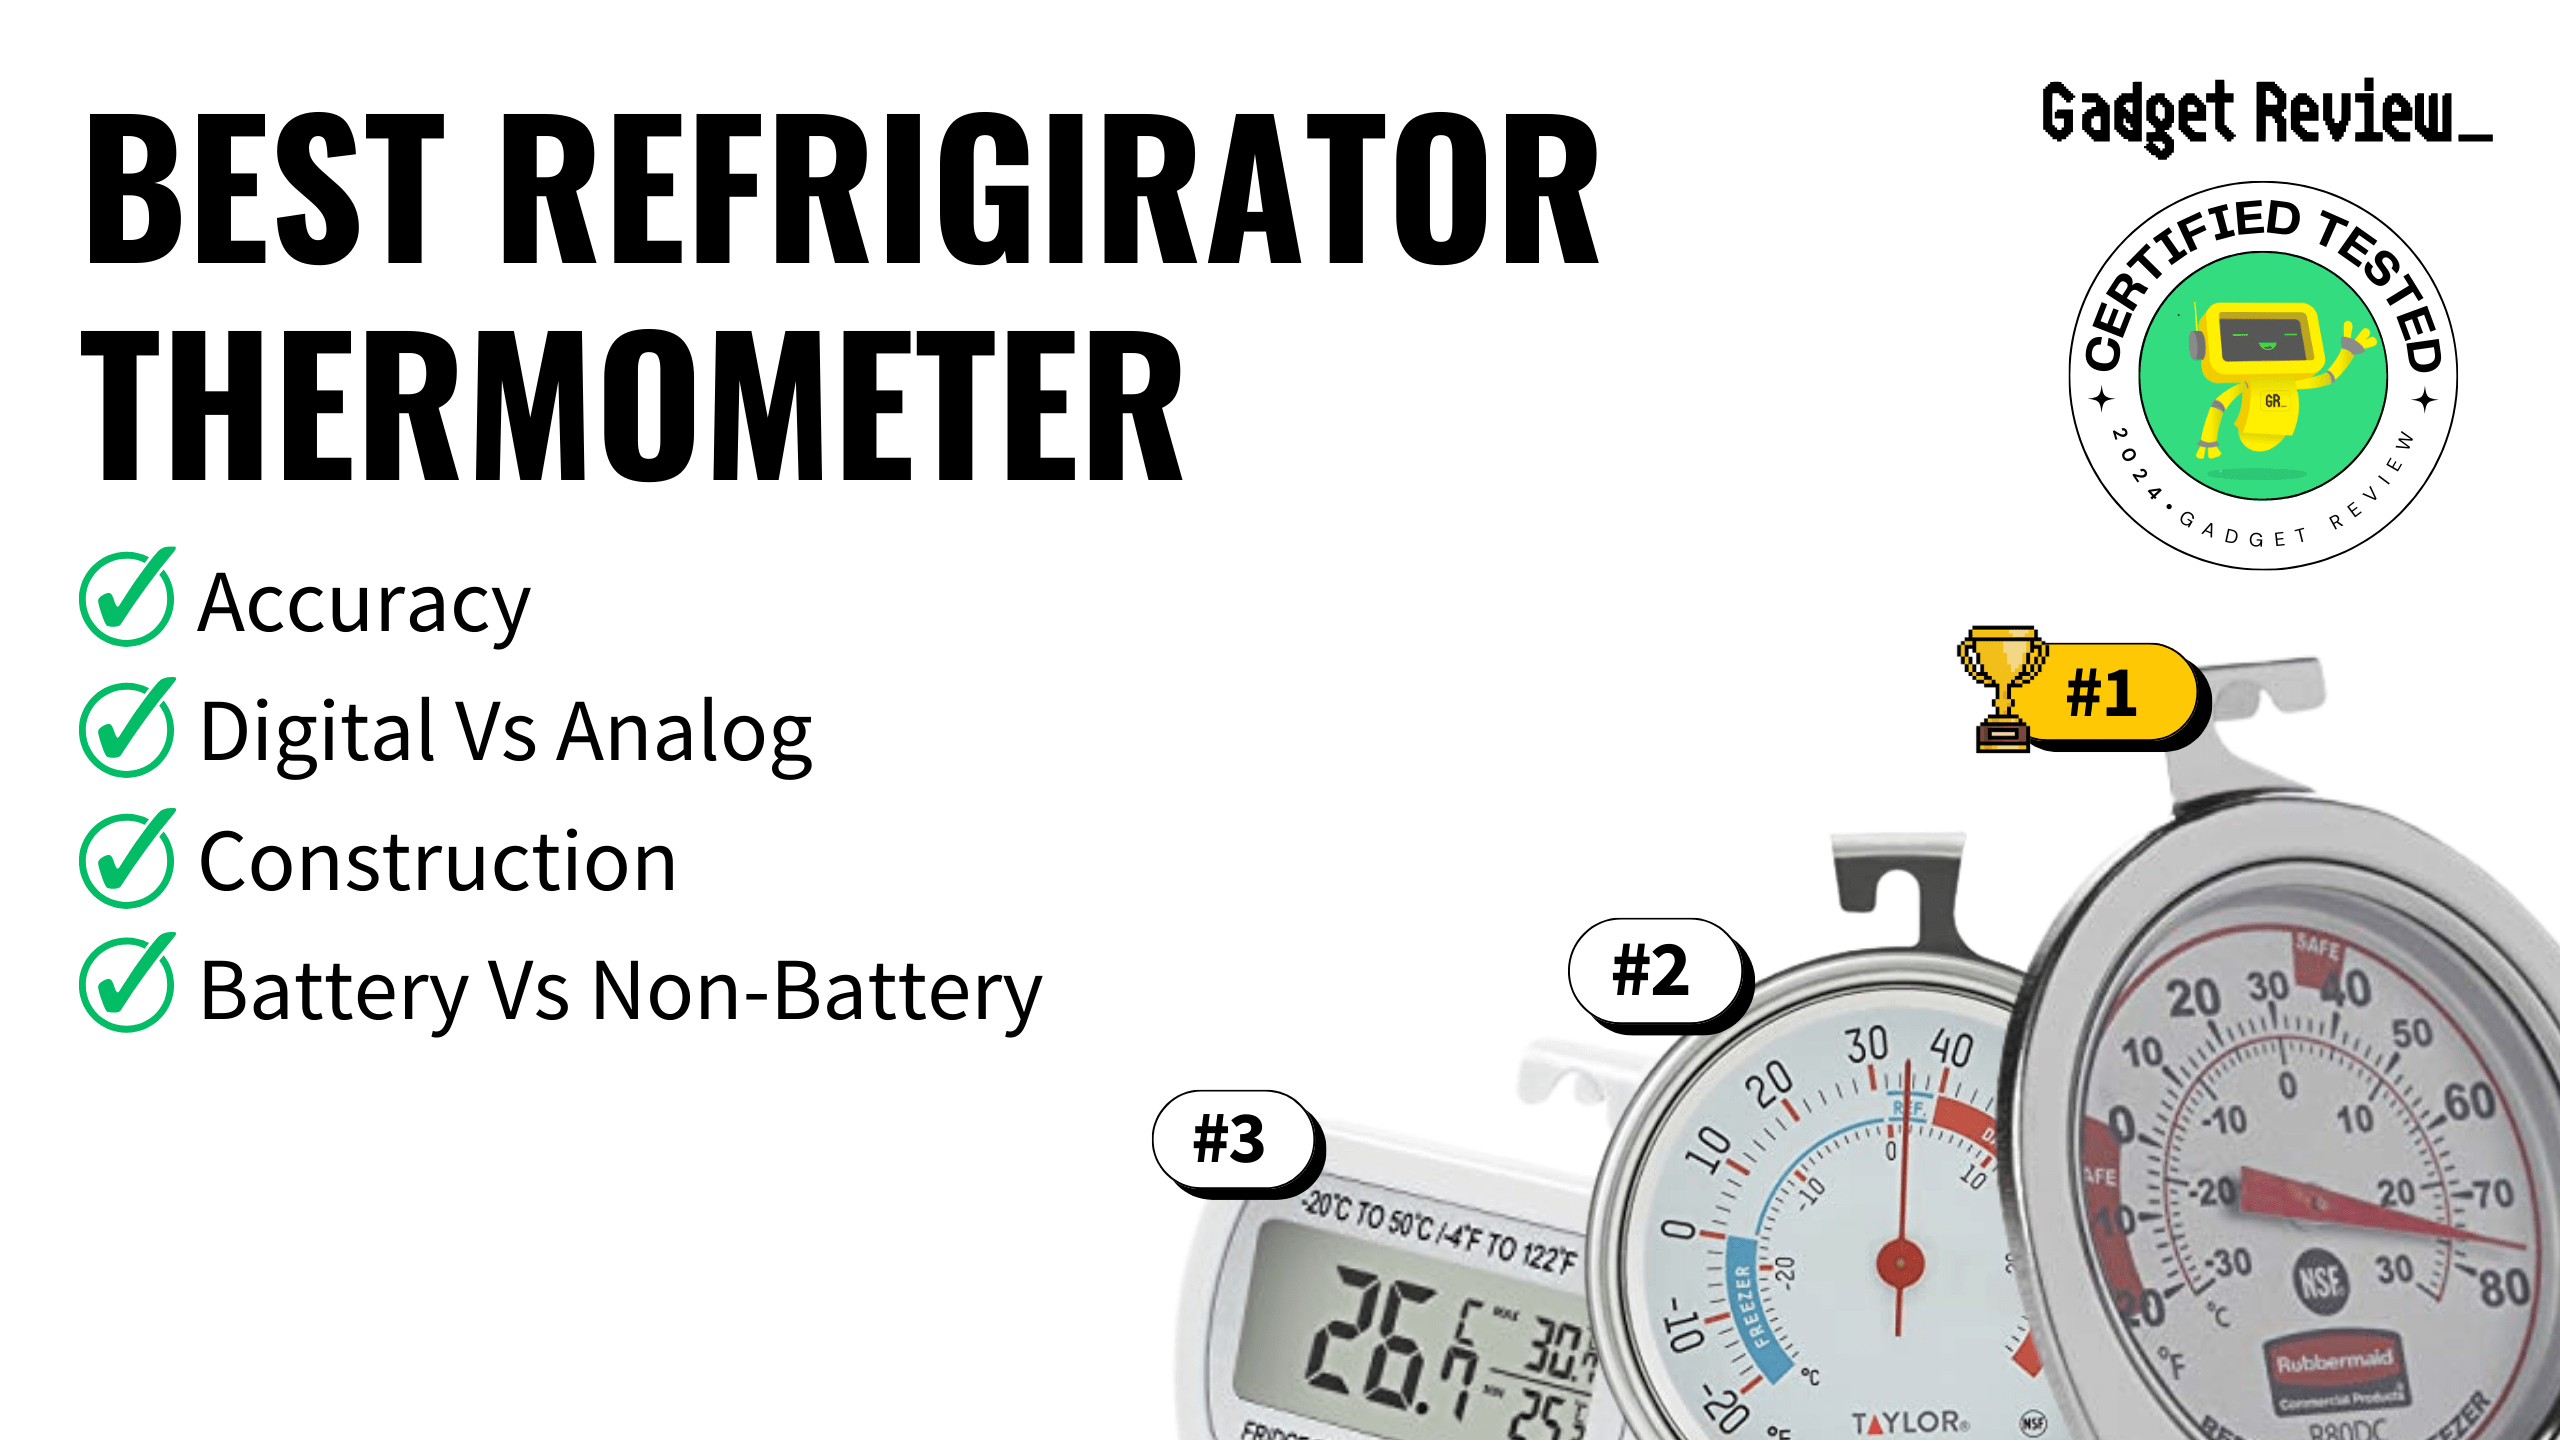 best refrigerator thermometer guide that shows the top best refrigerator model